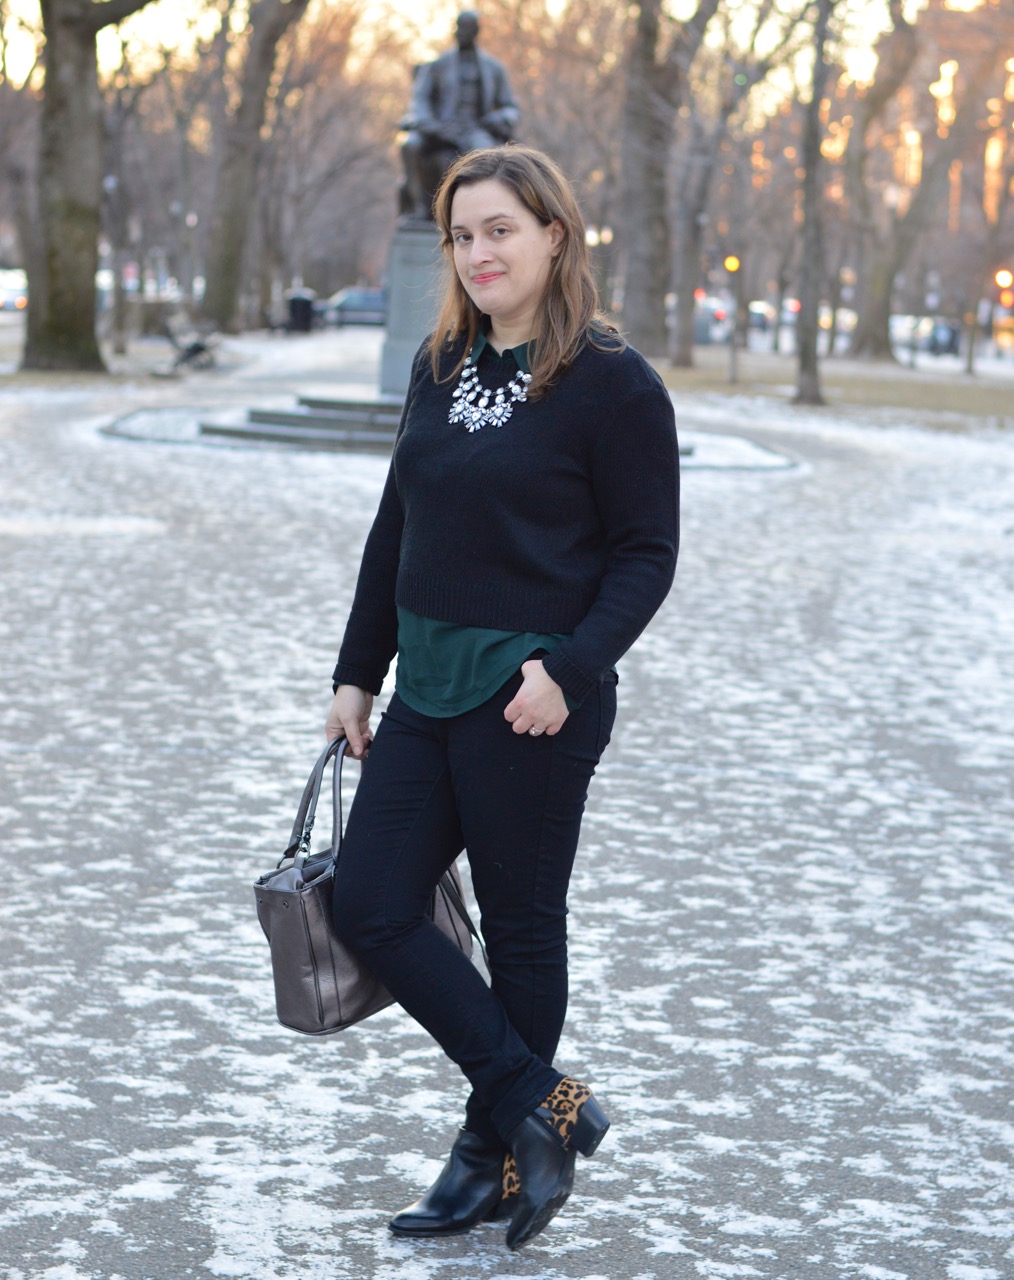 Styling a cropped sweater